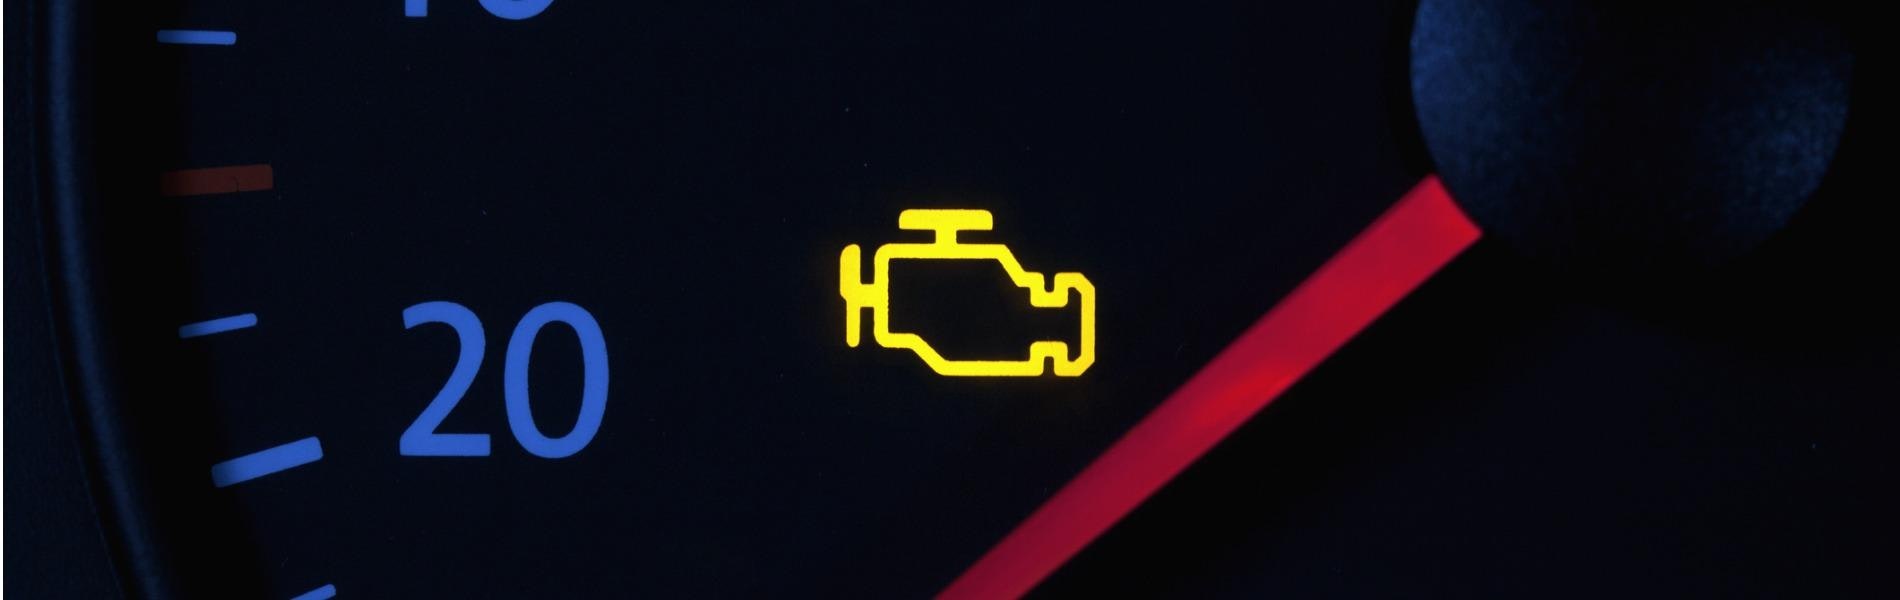 Engine Check Light Turned On? Let Us Figure It Out for You - Jiffy Lube